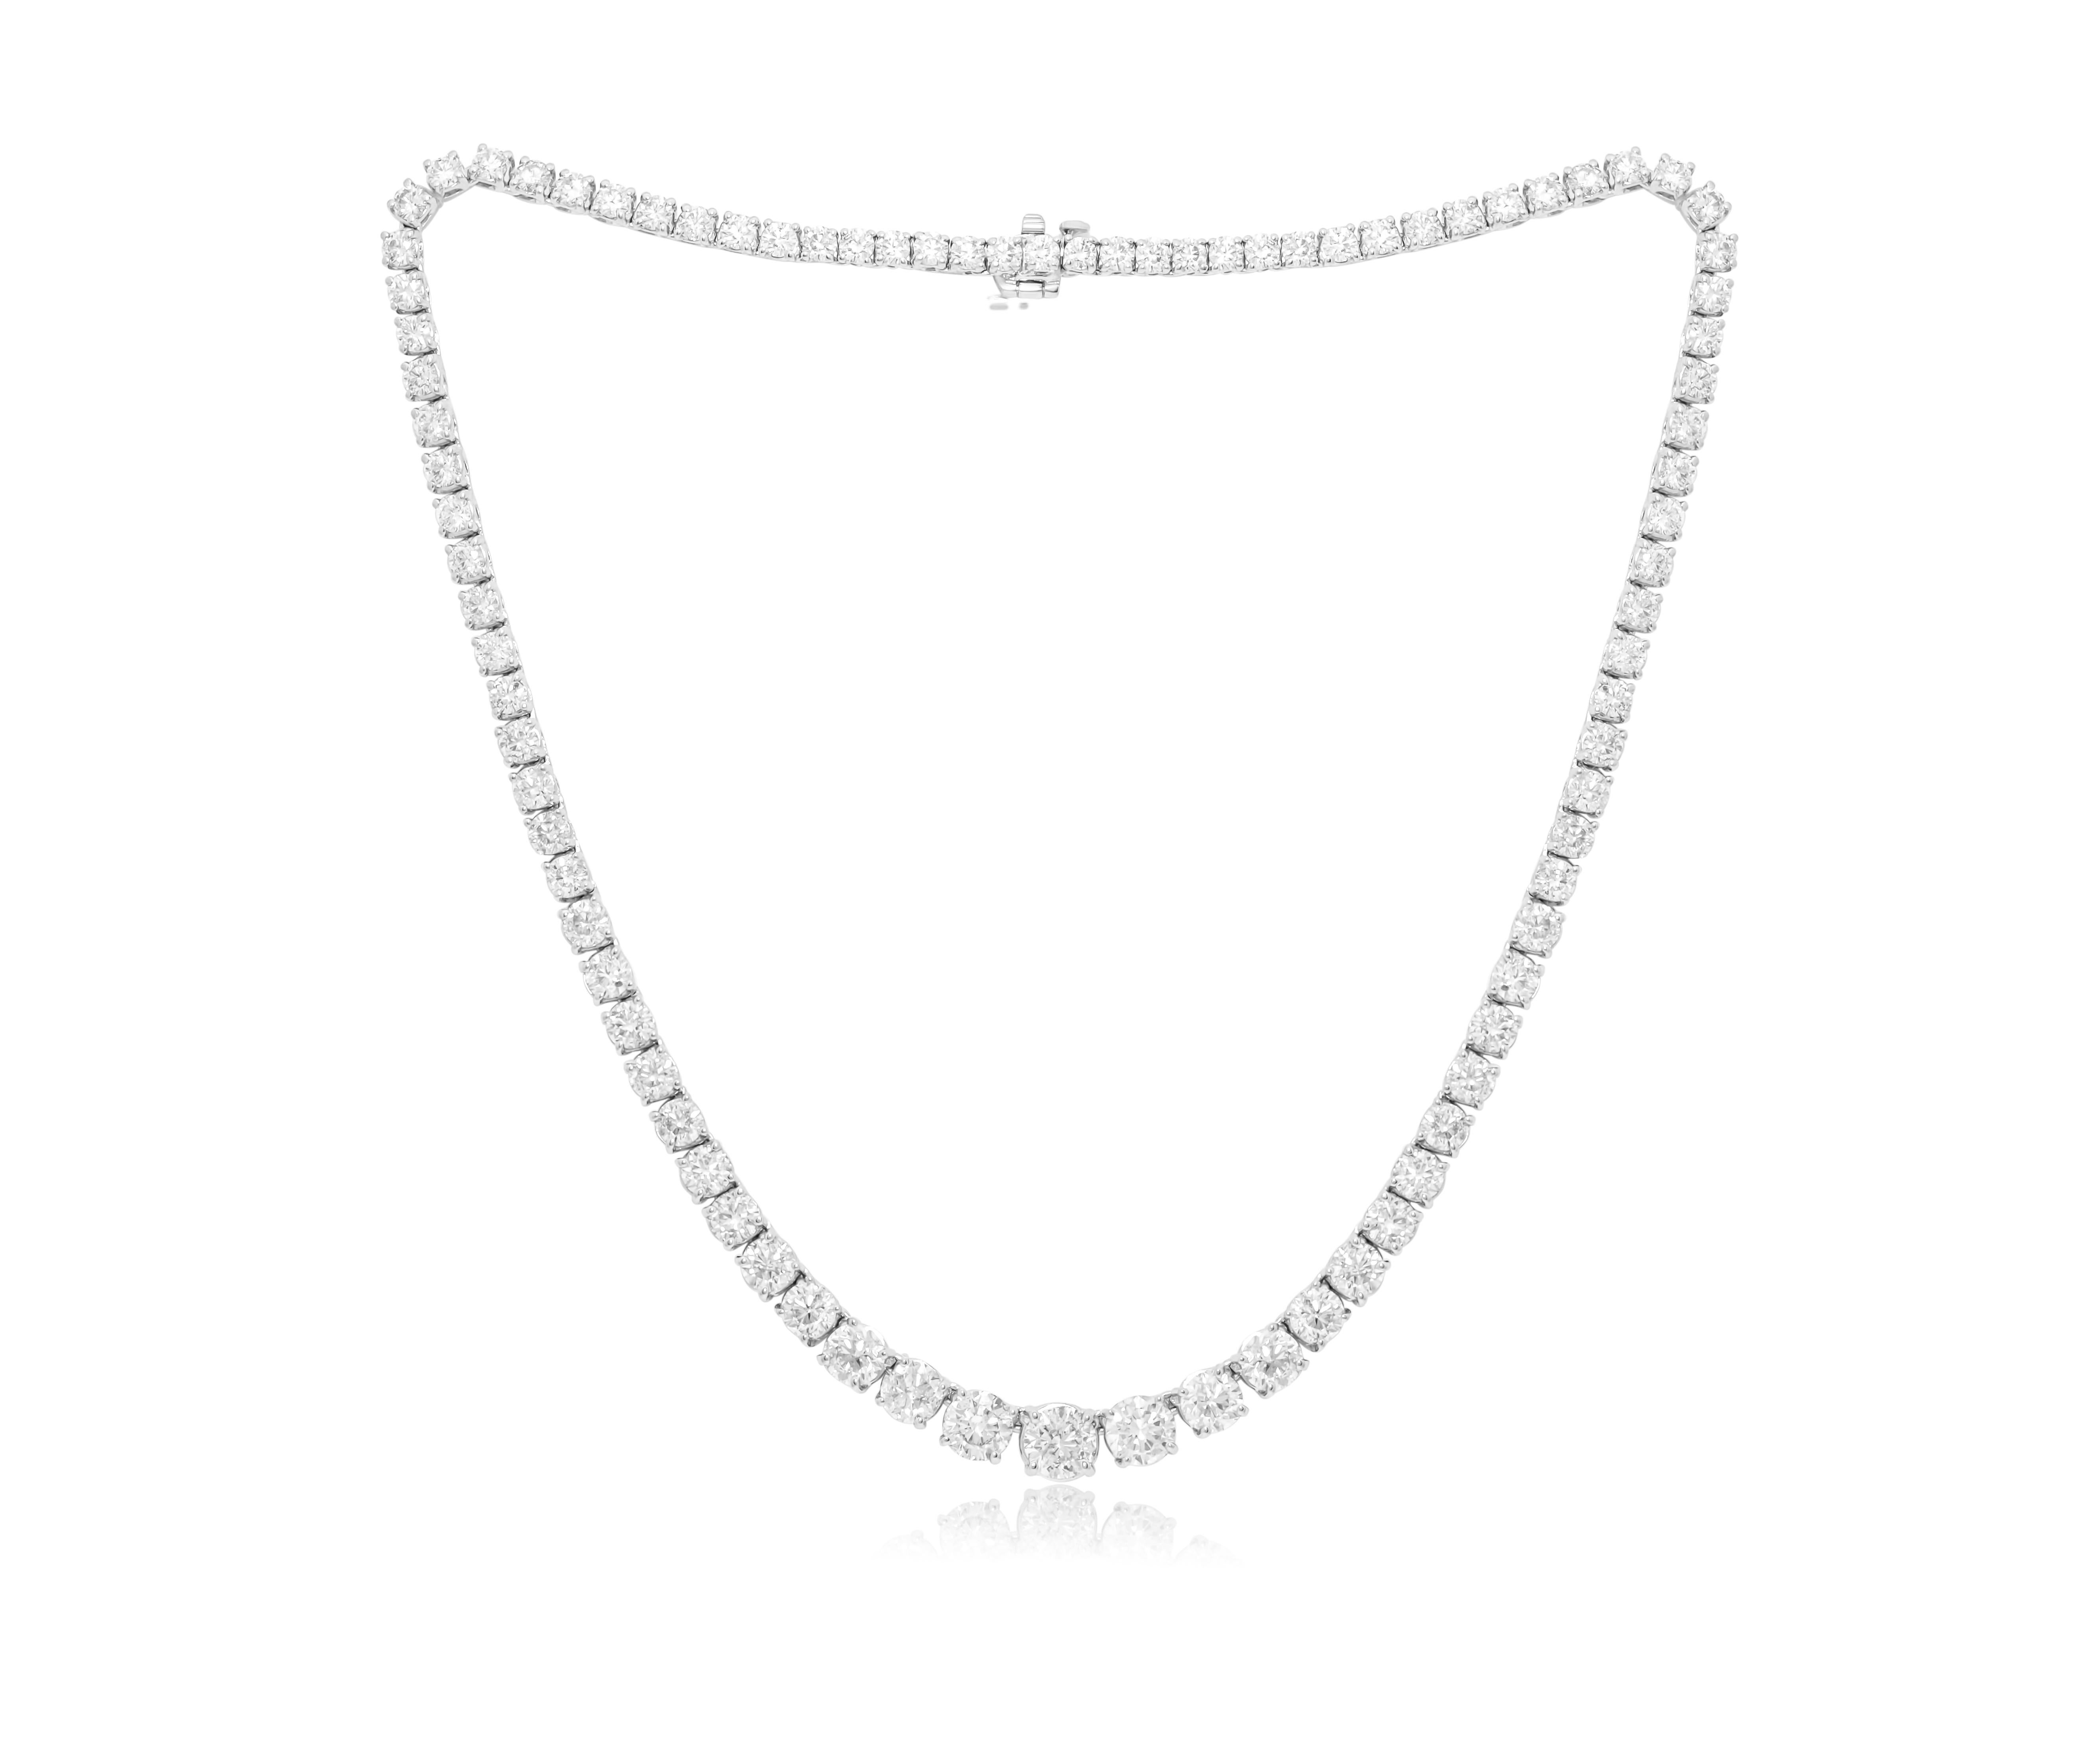 Modern Diana M. 14kt White Gold Graduated Reviera Tennis Necklace  20.00 cts 4 prong For Sale